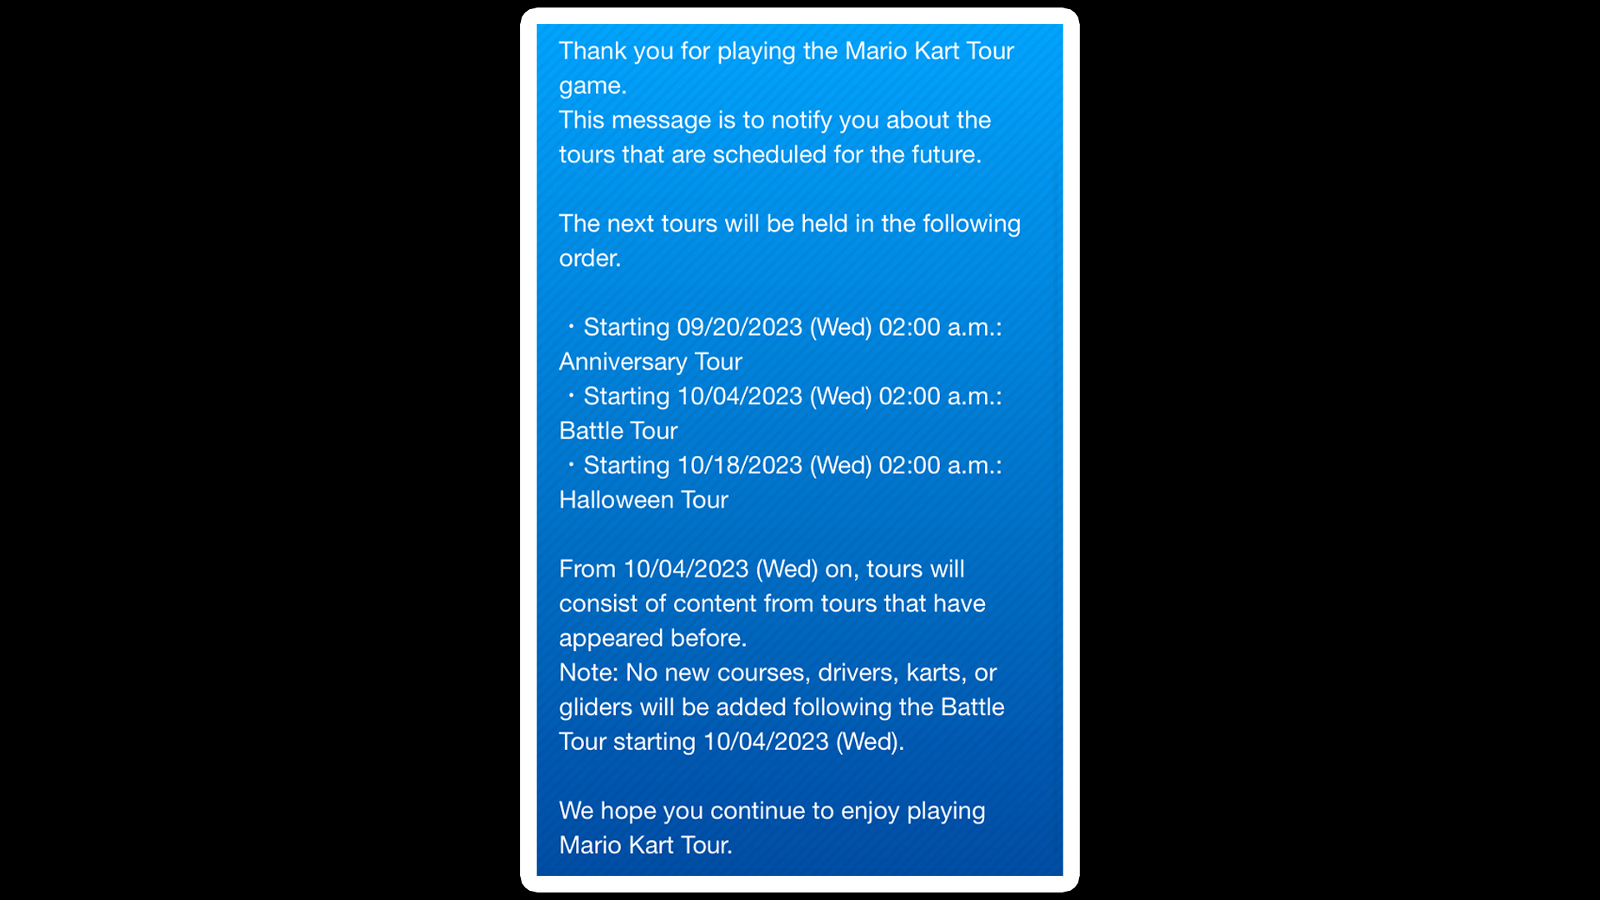 The final message regarding the upcoming updates for Mario Kart Tour.